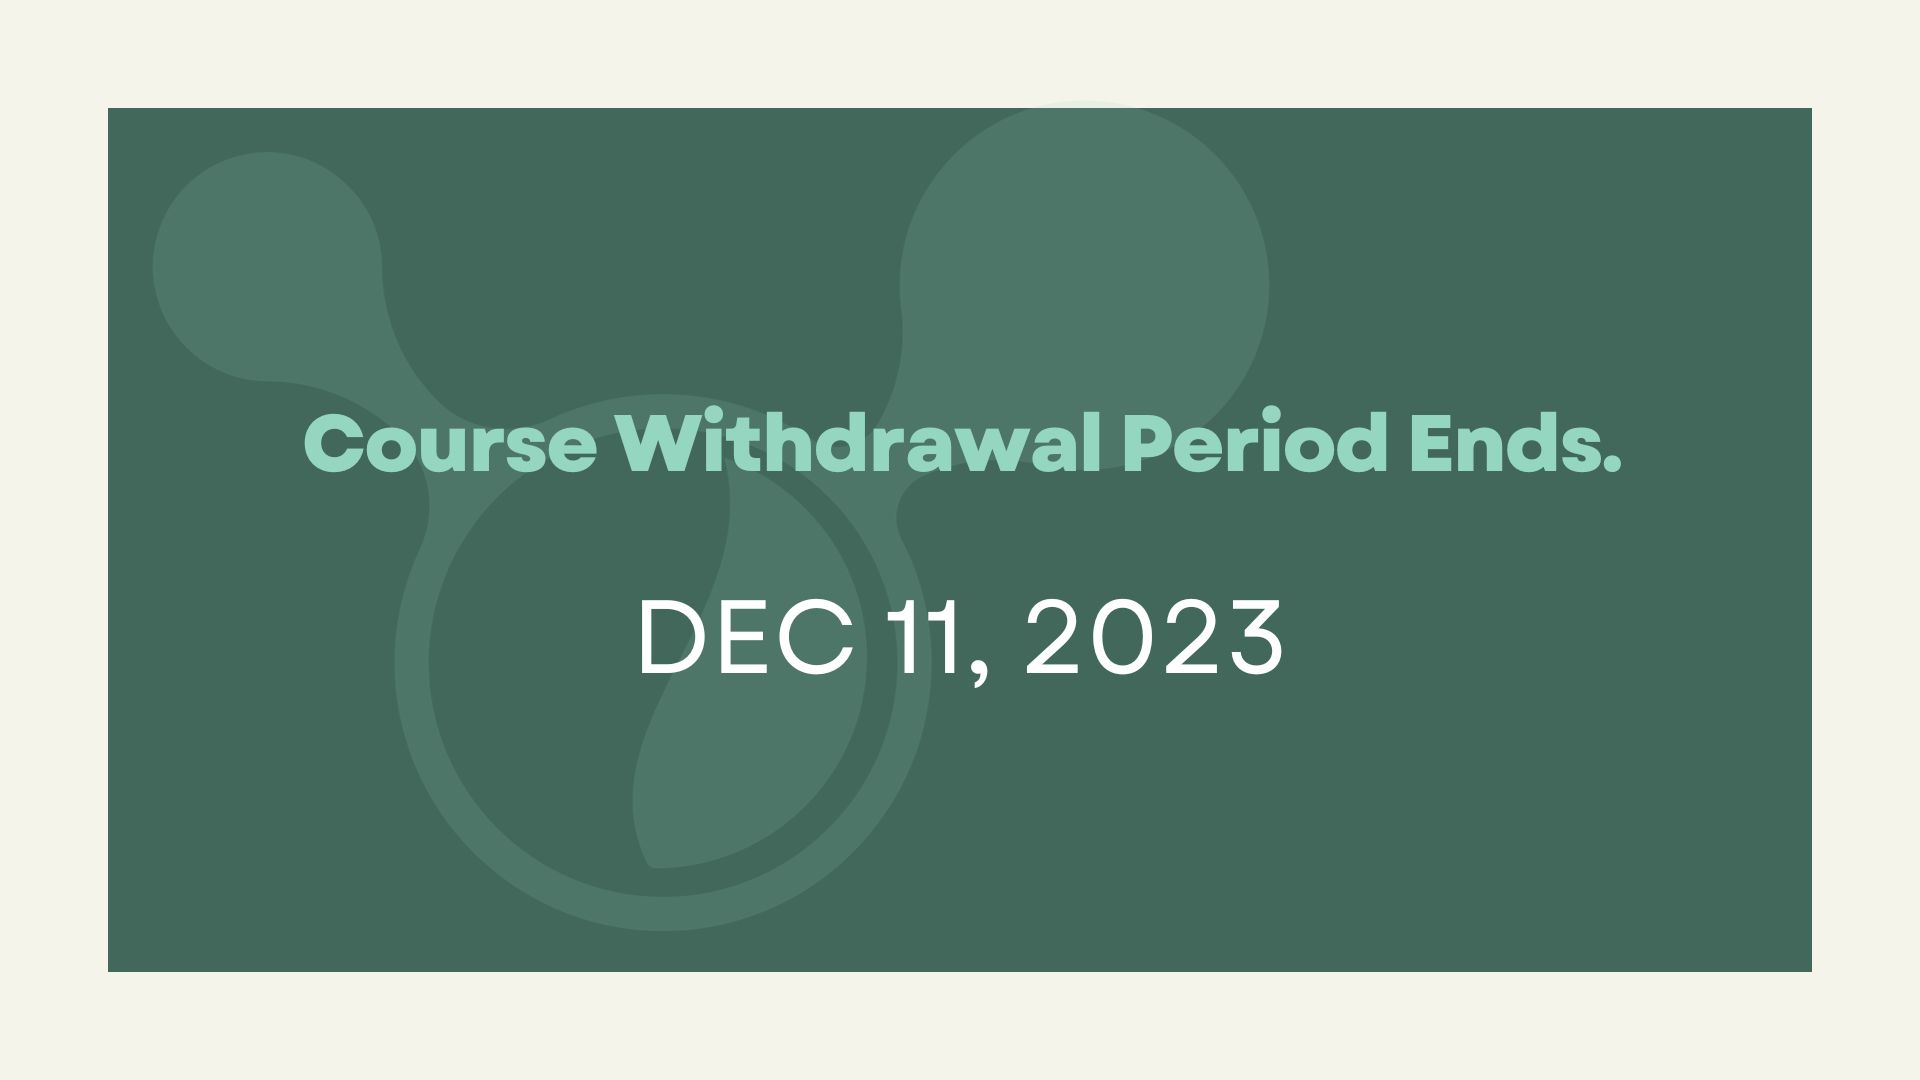 Course Withdrawal period ends. Last day to withdraw from course(s) WITH